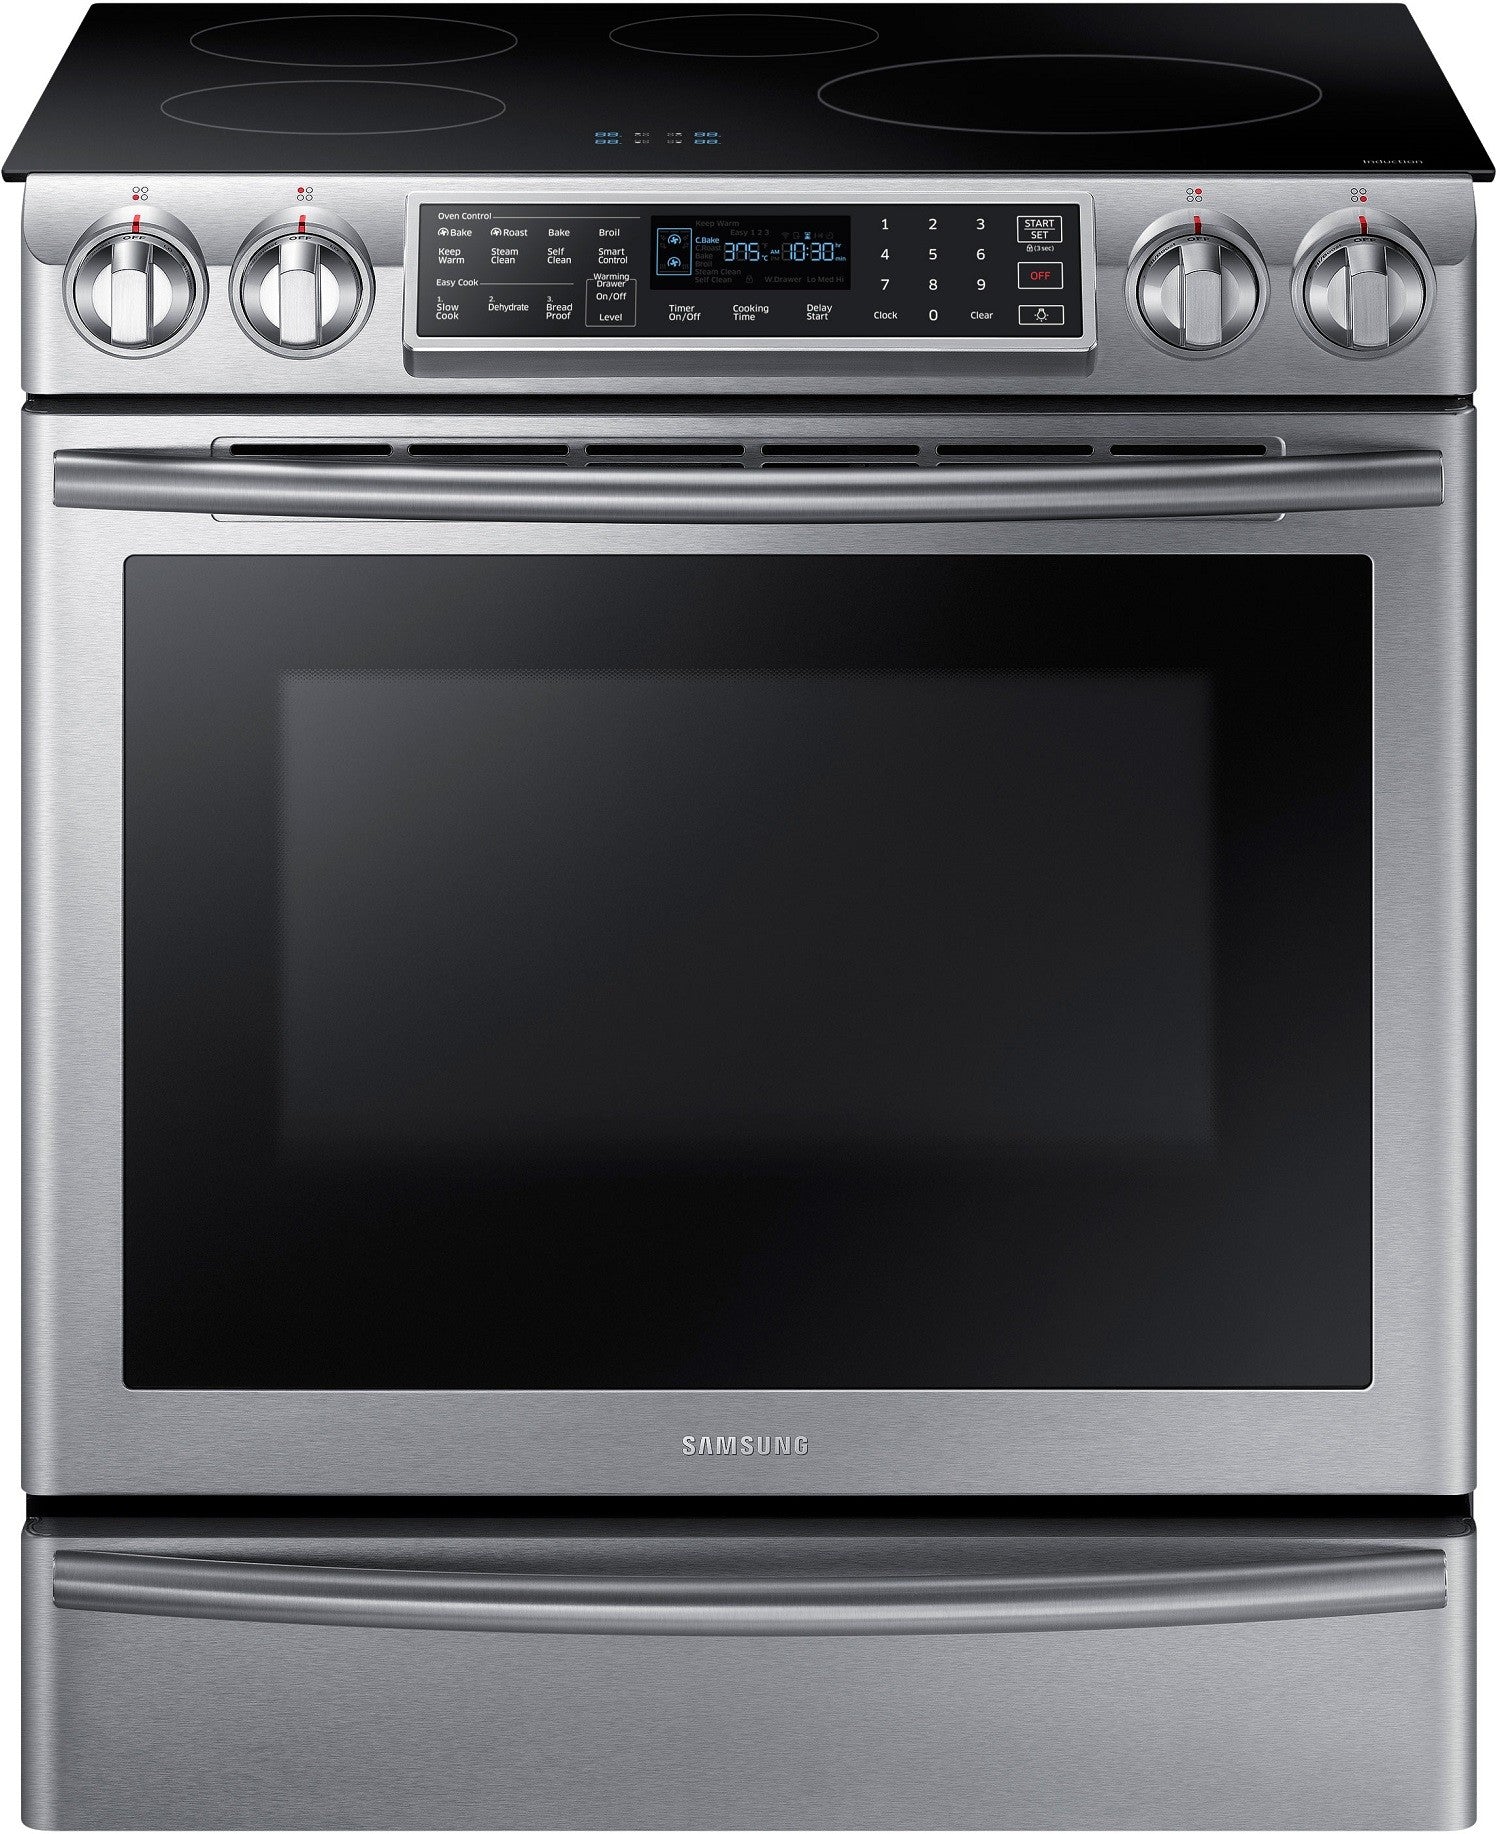 Samsung NE58K9560WS/AC 5.8 Cu. Ft. Electric Induction Self-cleaning Slide-in Smart Range With Convection - Stainless Steel - Samsung Parts USA